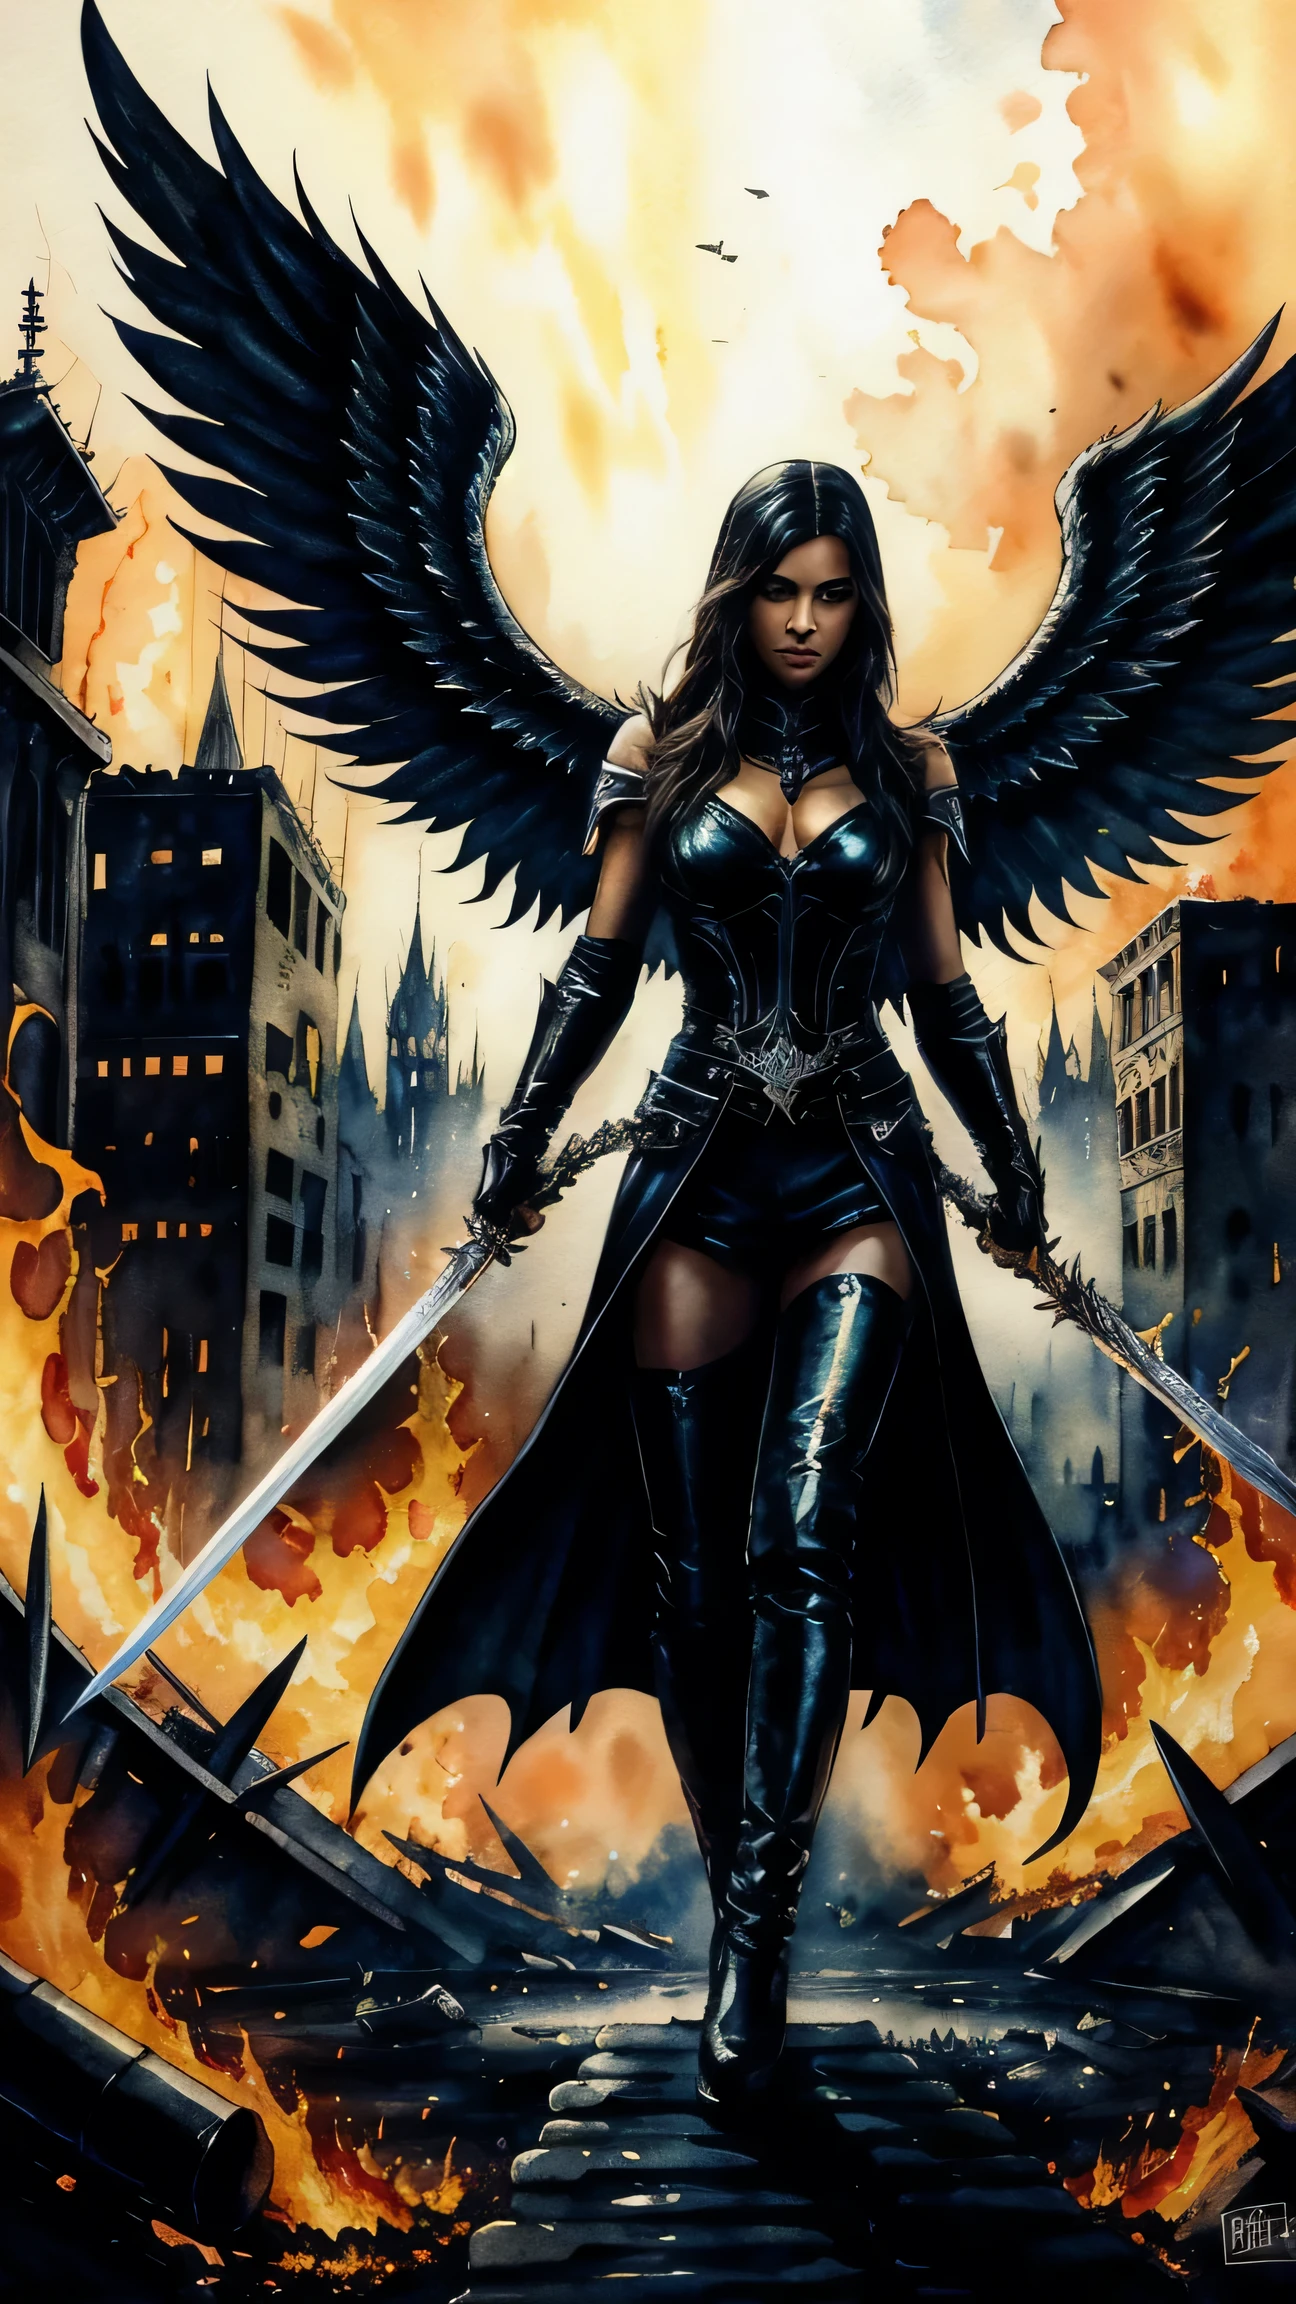 dark angel, angel of death with shiny sword, spreading dark wings, in the background city in ruins and flames, modern art, painting, drawing, watercolor, psychedelic colors